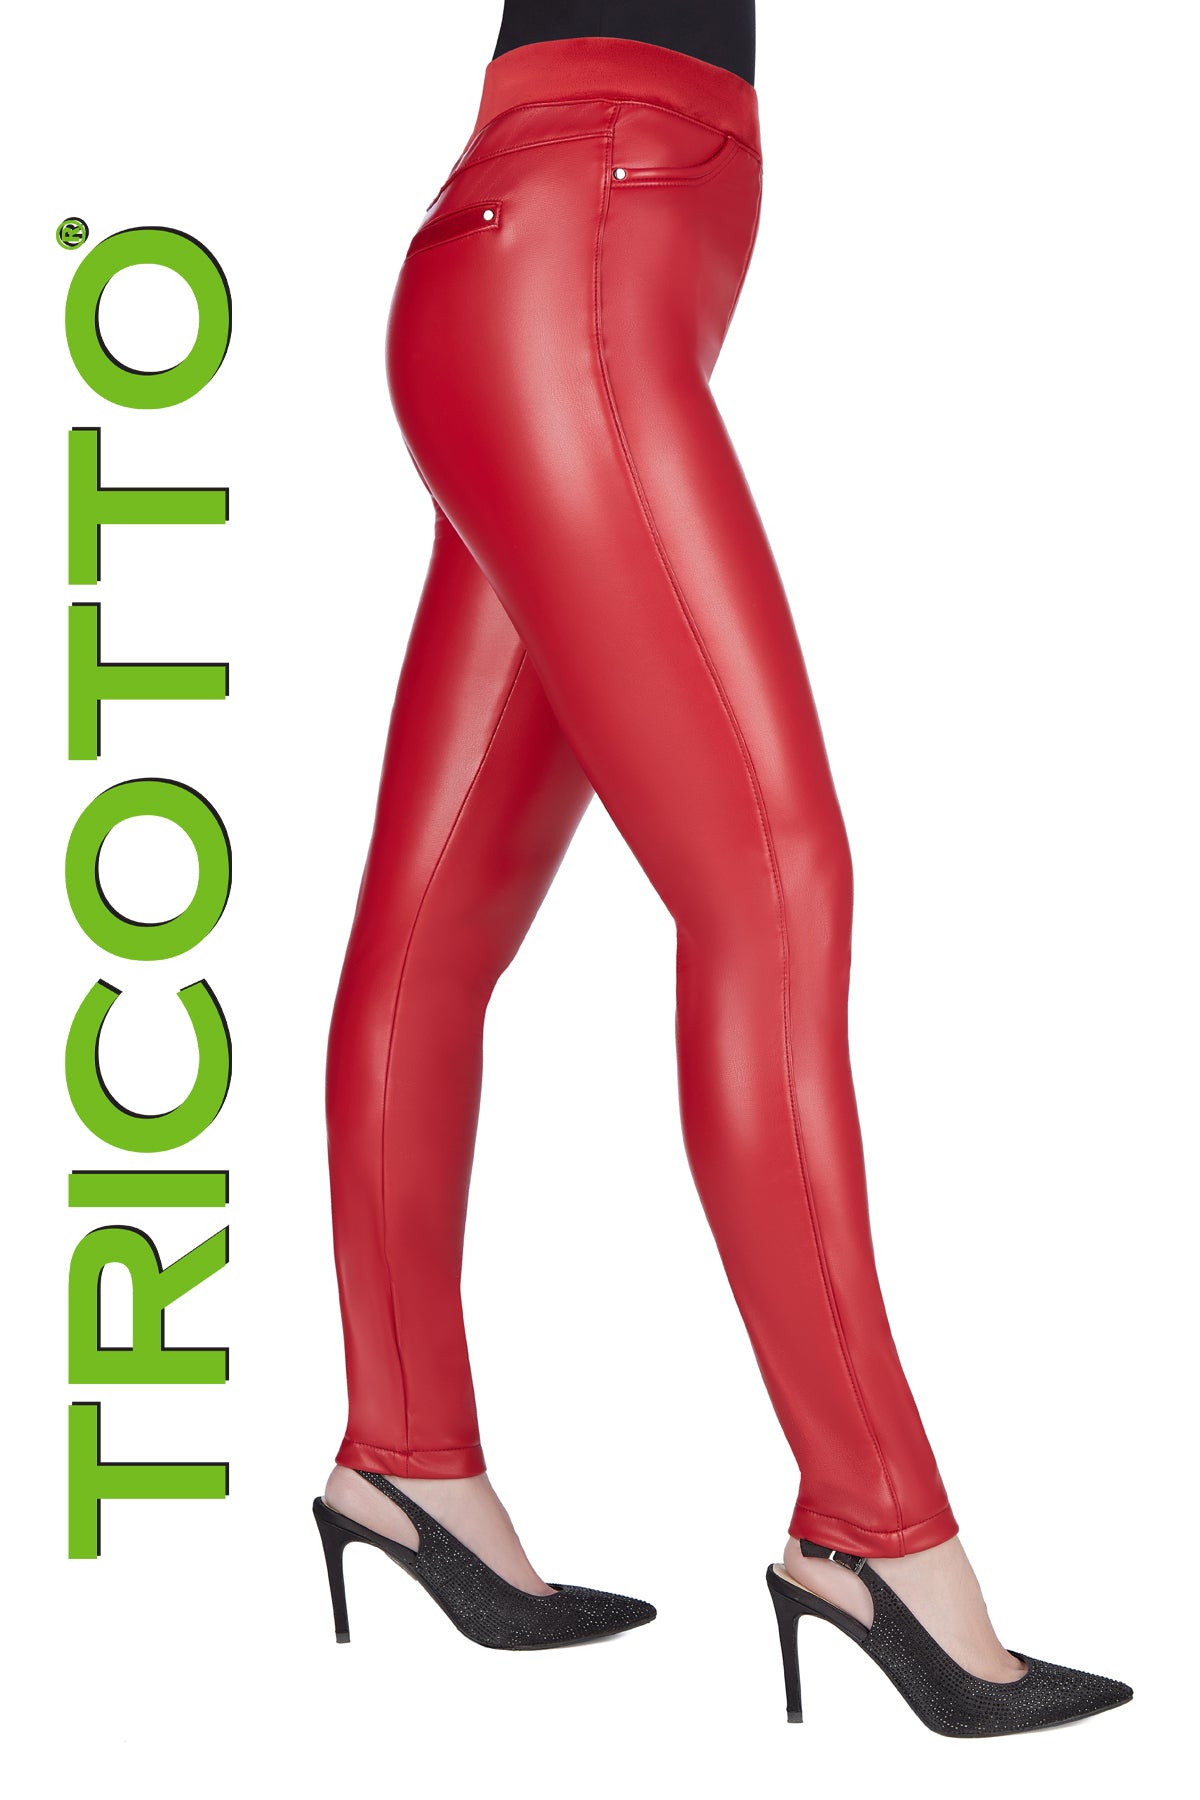 Tricotto Red Pant-Tricotto Vegan Leather Pant-Buy Tricotto Pants Online-Tricotto Clothing Montreal-Tricotto Online Shop